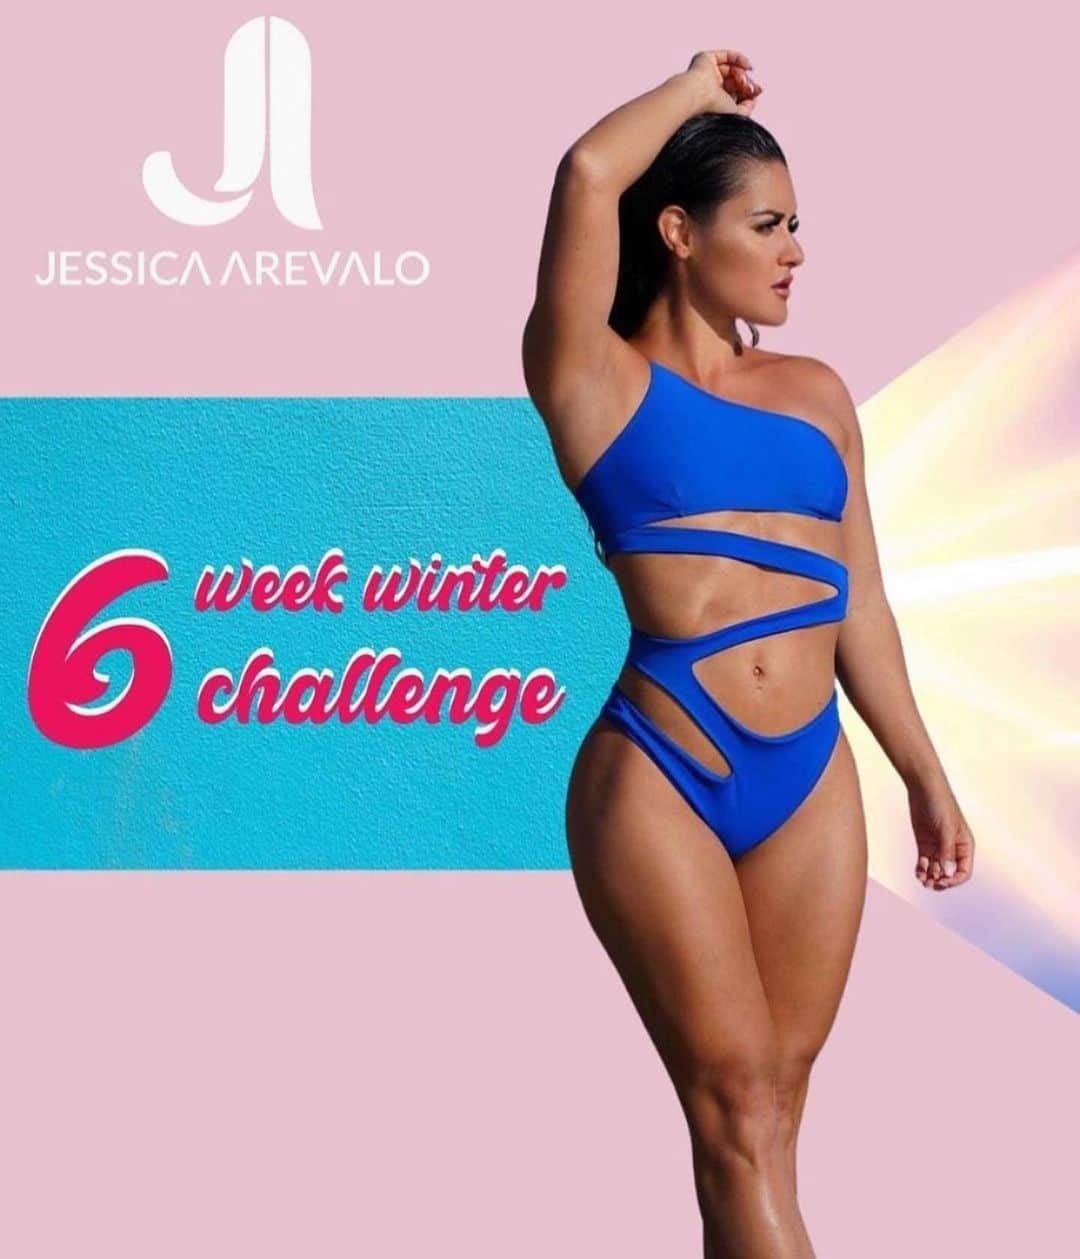 Jessica Arevaloのインスタグラム：「ONLY 48 HRS LEFT TO SIGN UP! MY 6 WEEK WINTER CHALLENGE IS NOW LIVE!😍  💥IF YOU ARE LOOKING TO TONE UP, LOSE FAT OR LEARN MY WAYS THIS CHALLENGE IS FOR YOU!💥 - Open enrollment is through Dec 13 & the challenge starts Dec 14! DON’T WAIT!🙌🏼 - 🔺My 6 Week Winter is challenge is just $99!!!  🔺This program includes: - 🔺BOTH GYM/HOME WORKOUTS  - 🔺Over $6k in cash prizes - 🔺One on One Coaching with me - 🔺Weekly Check ins - 🔺Workout Program +Macros/Meal Plans + Cardio Regimen  - 🔺Private Facebook Group and more! - 🔺WORLDWIDE ENTRY  - 🔺 FOR WOMEN & MEN  - CHECK OUT LINK IN BIO TO SIGN UP!👆🏼If you have any question please feel free to DM me directly!📩」